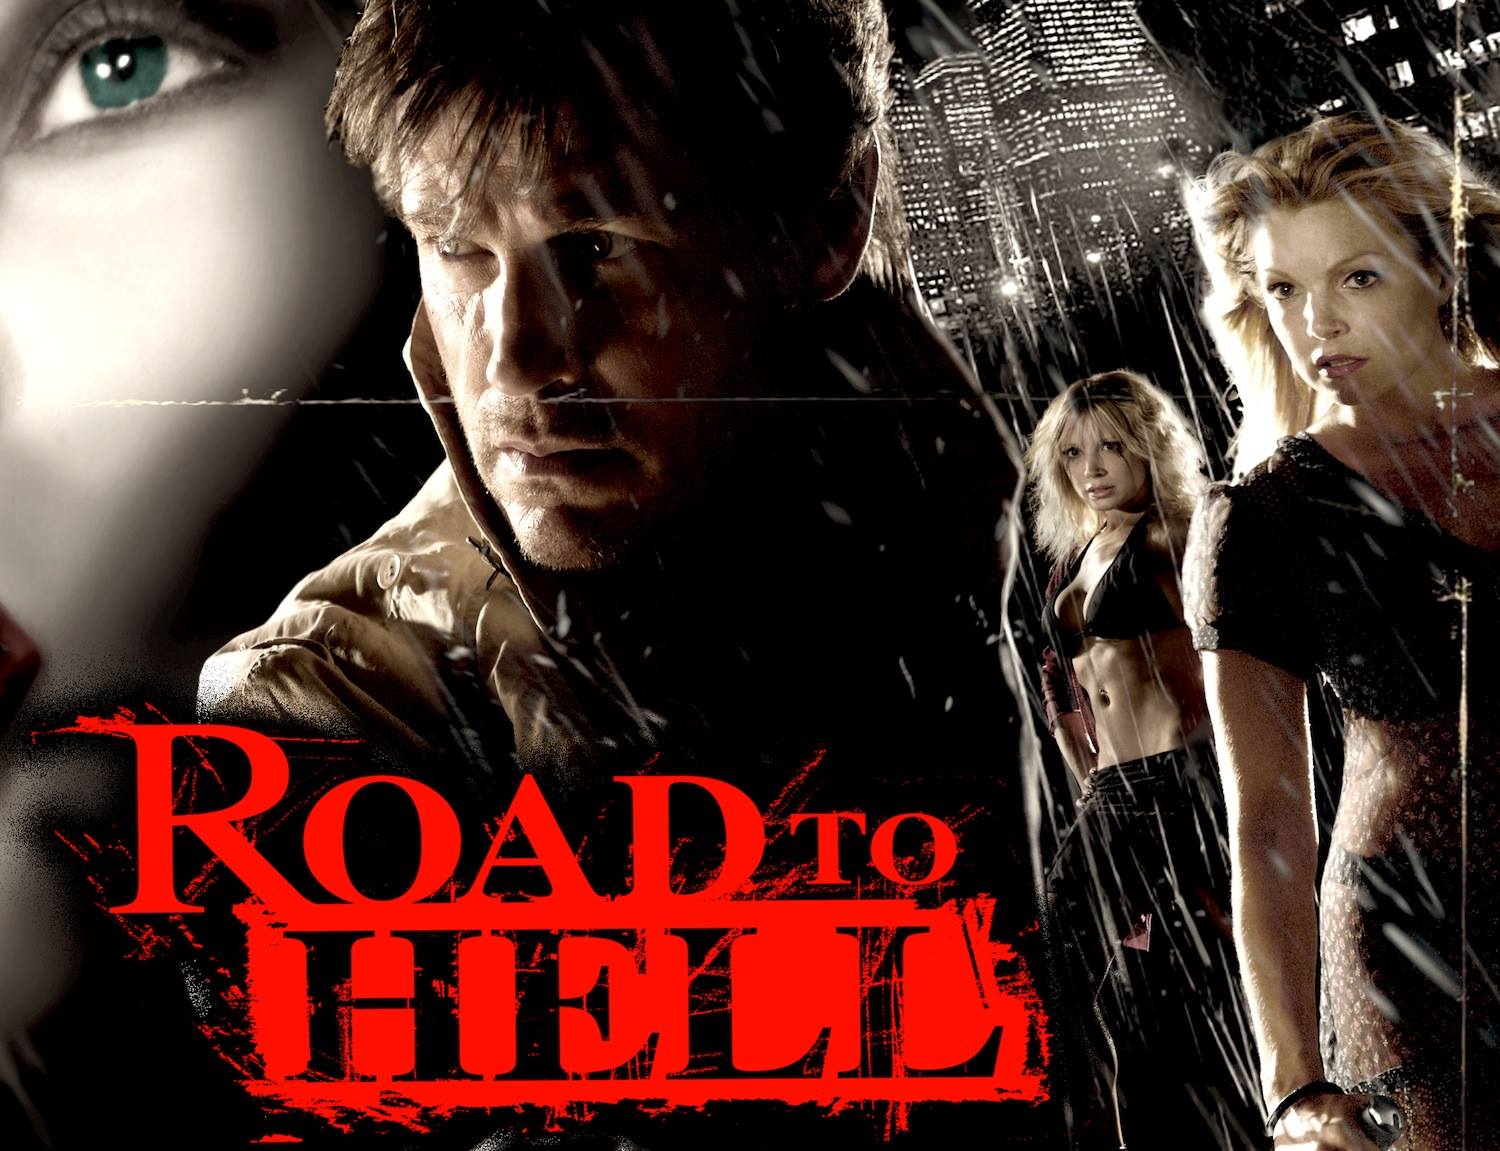 road to hell retribution download